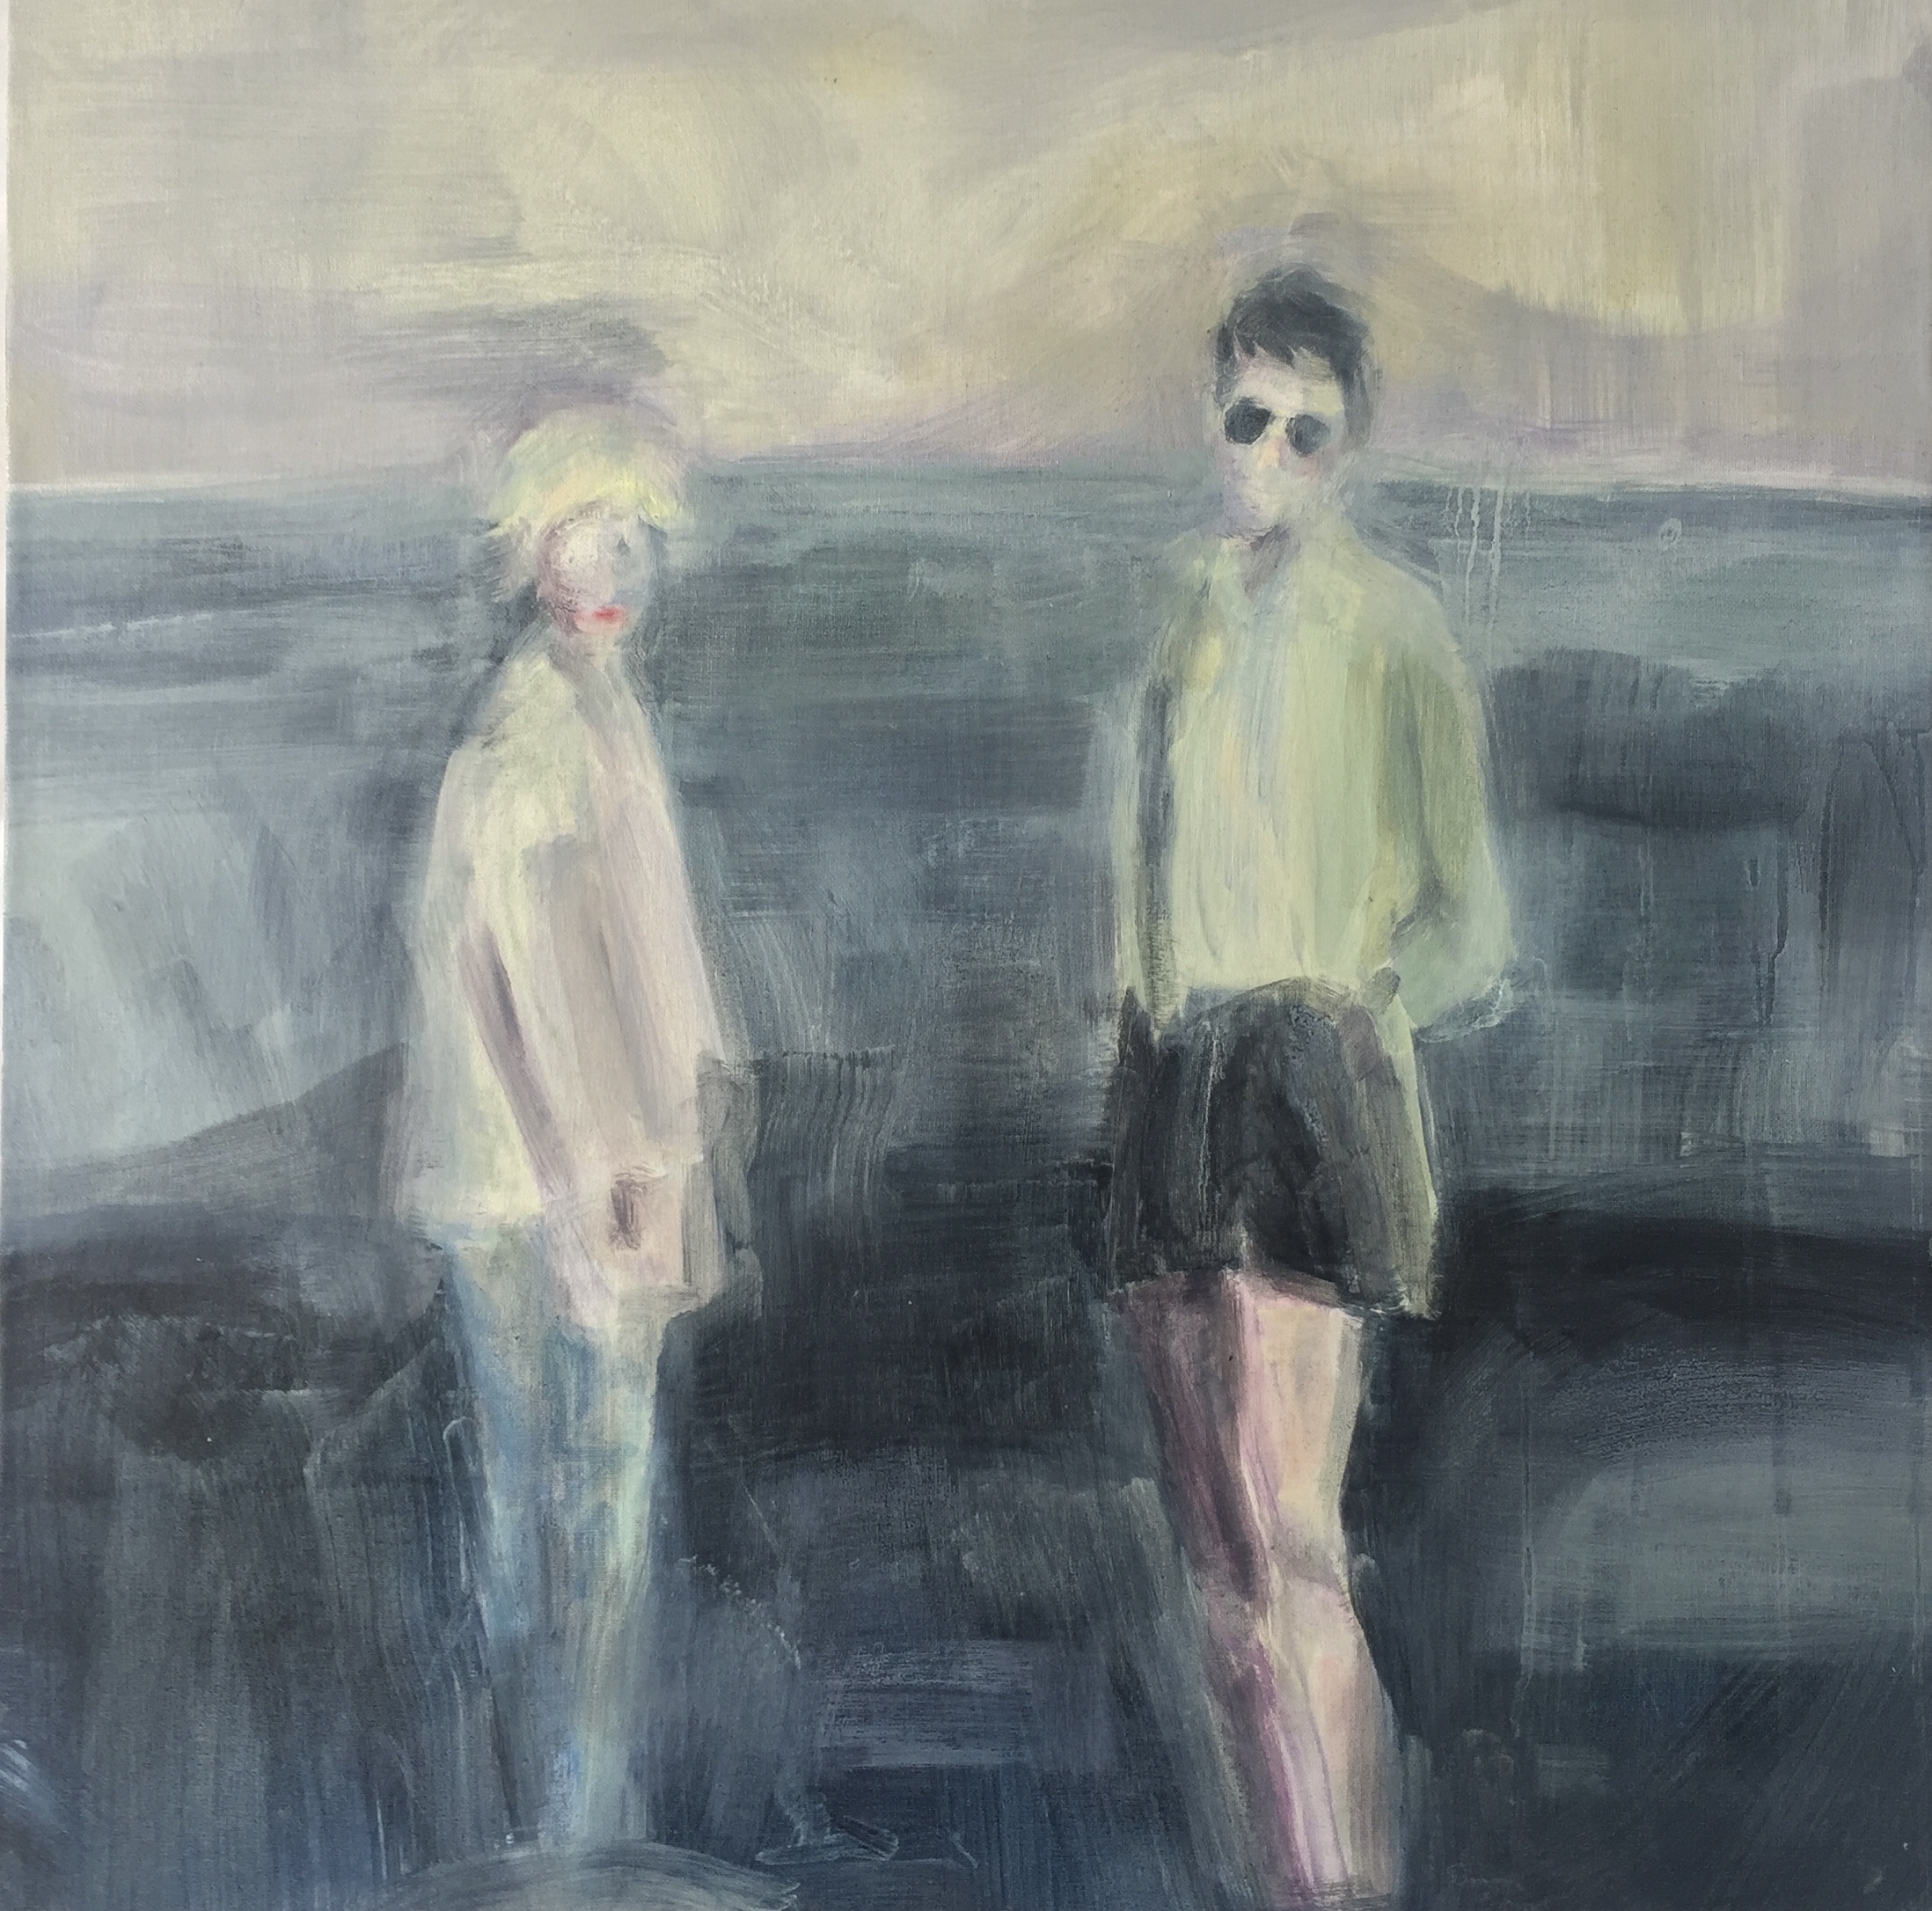 'Sunglasses For Reflection', Louise Todd, Oil on canvas, mounted on cradled panel, 50 x 50 cm